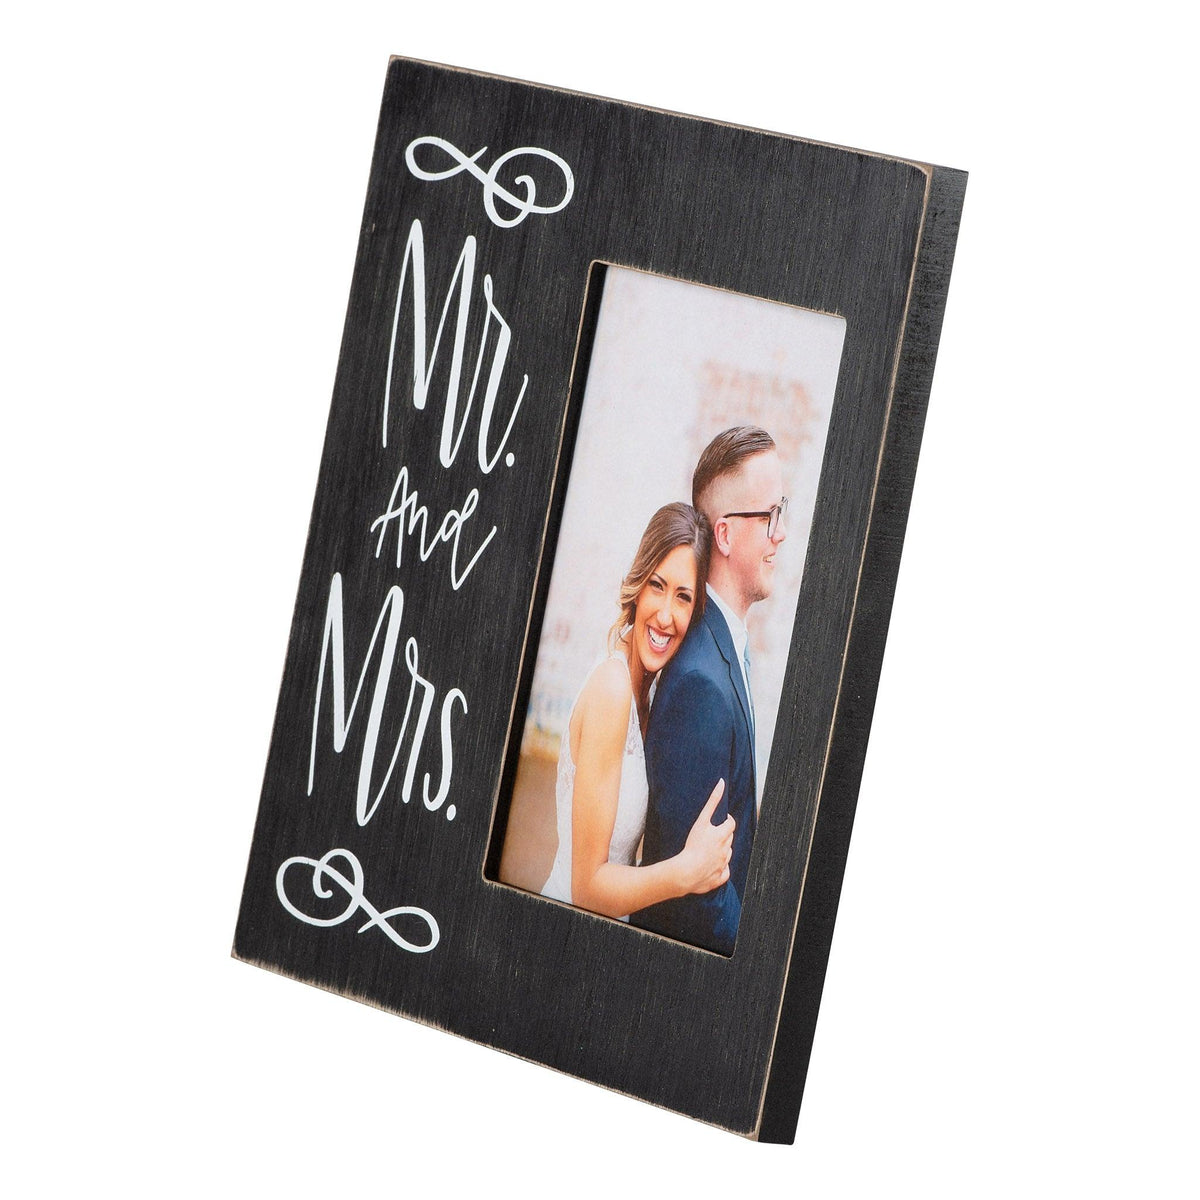 Just Married Frame - GLORY HAUS 